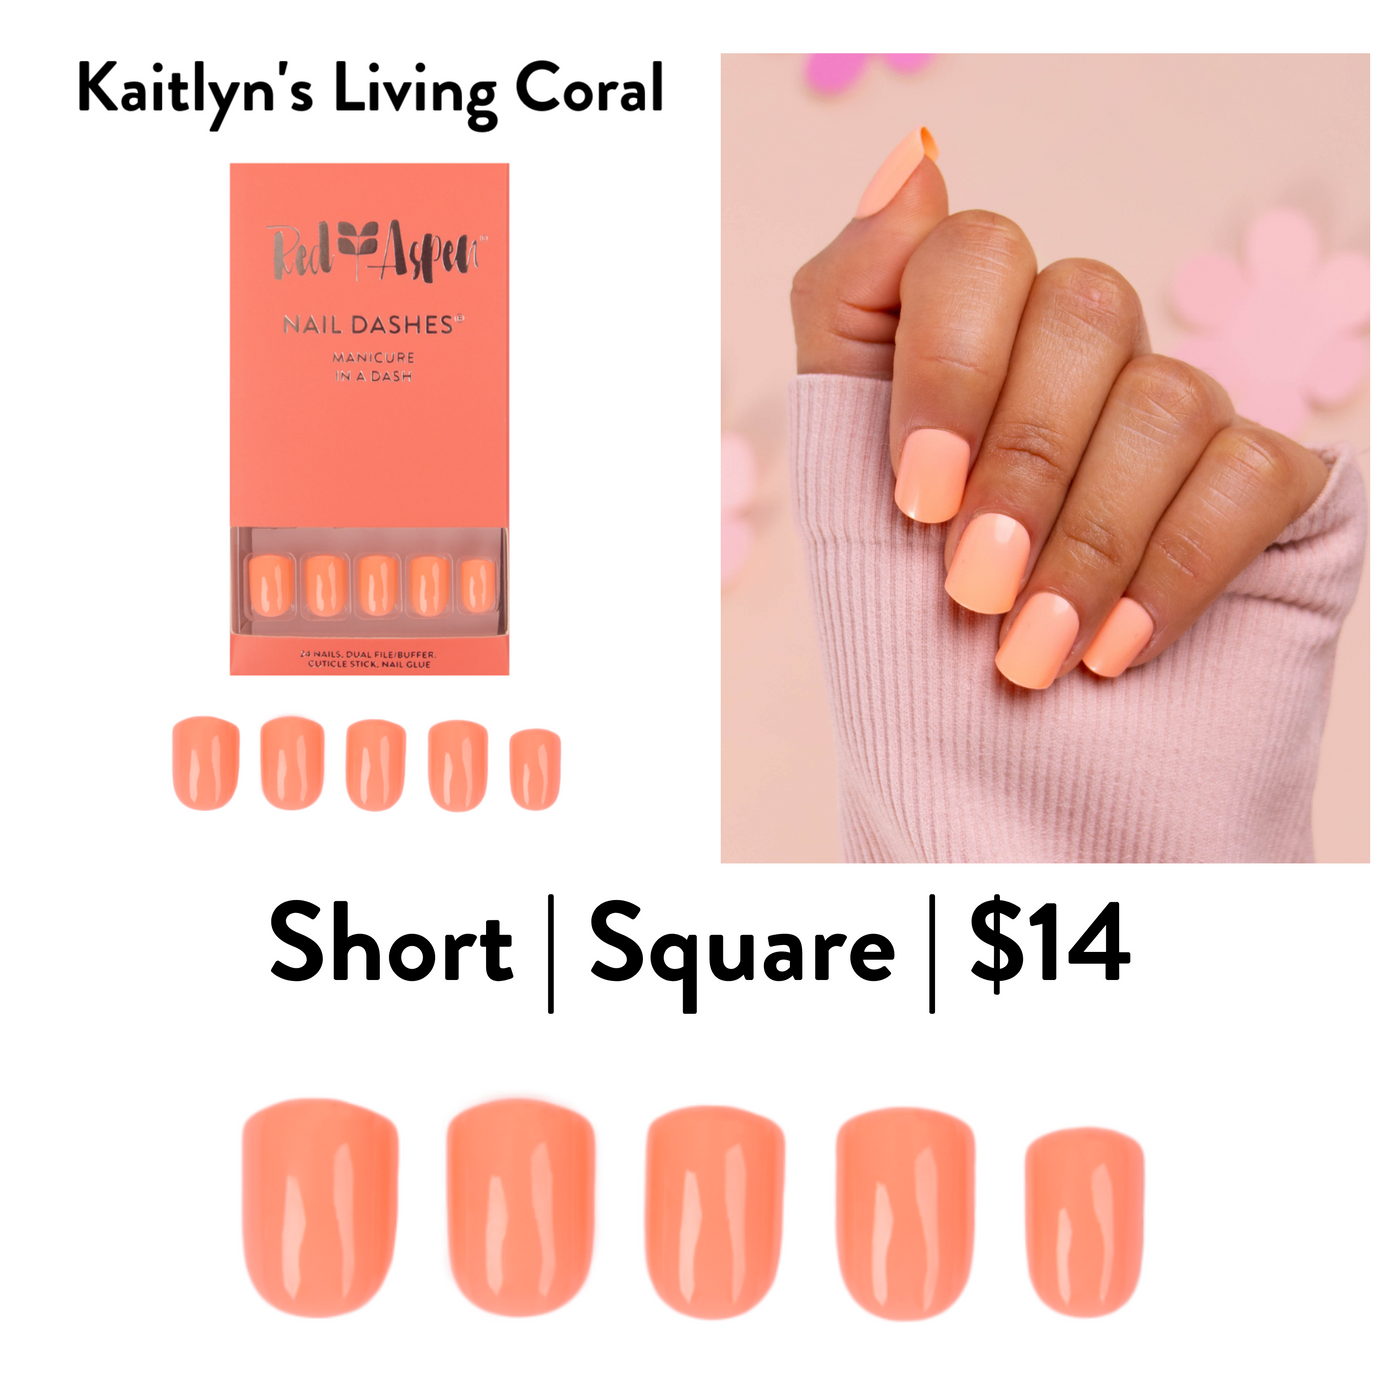 Red Aspen Nail Dashes [Kaitlyn's Living Coral]